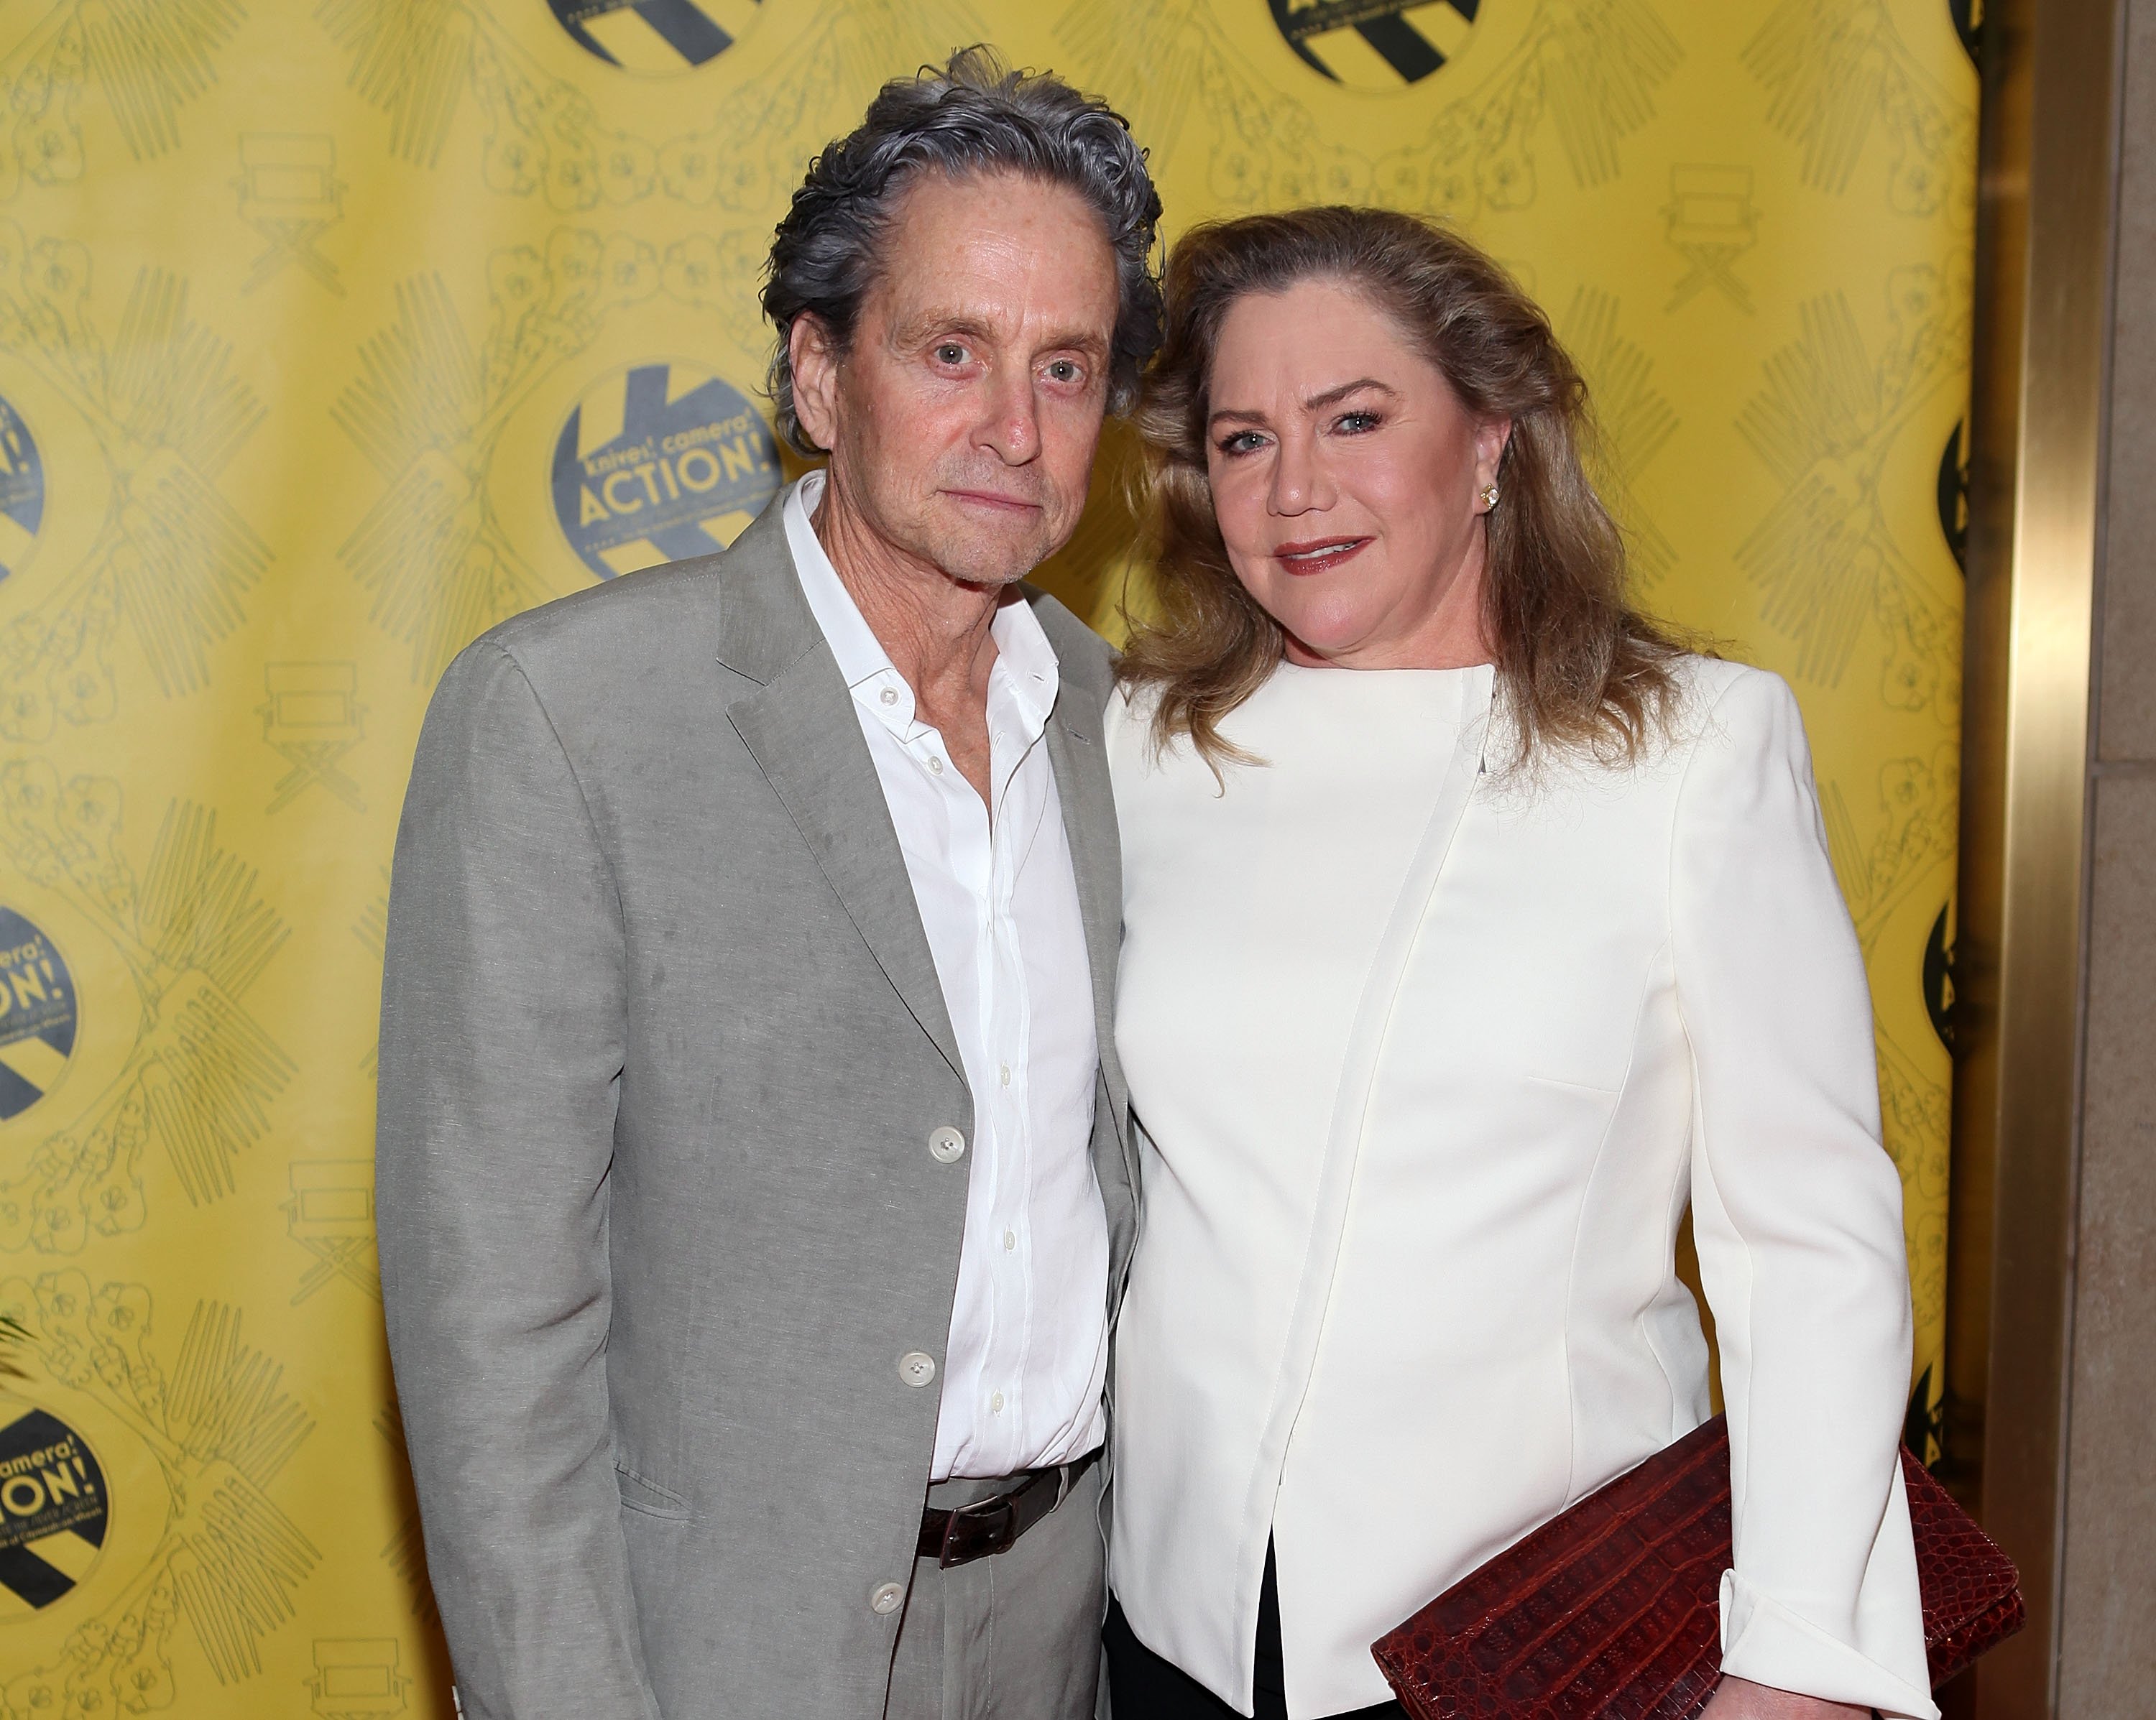 Michael Douglas and Kathleen Turner attending the 27th Annual "Chefs' Tribute To Citymeals-On-Wheels" Benefit at Rockefeller Center on June 4, 2012 in New York City. | Source: Getty Images